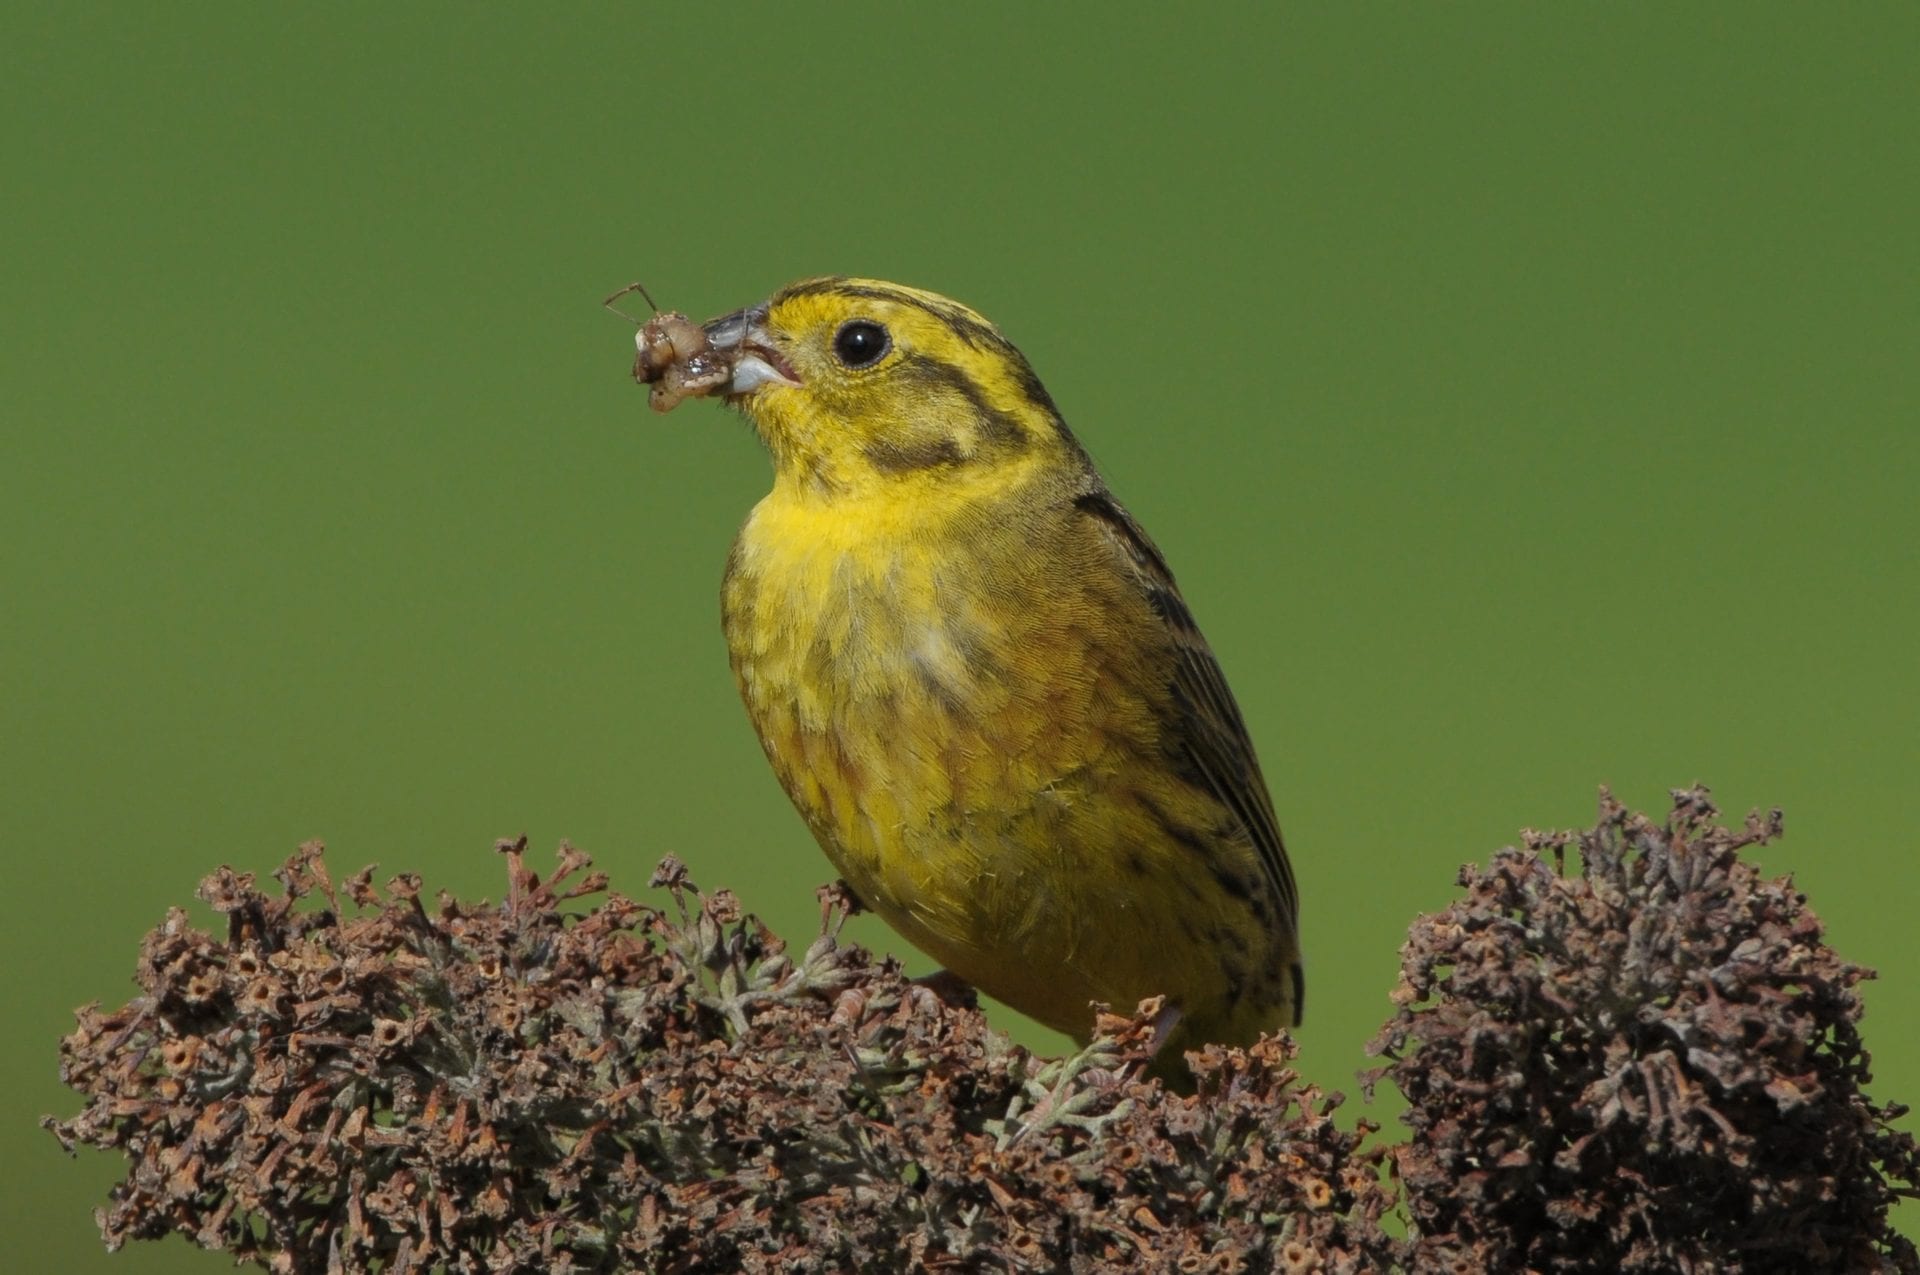 yellowhammer-with-insect-food-in-beak